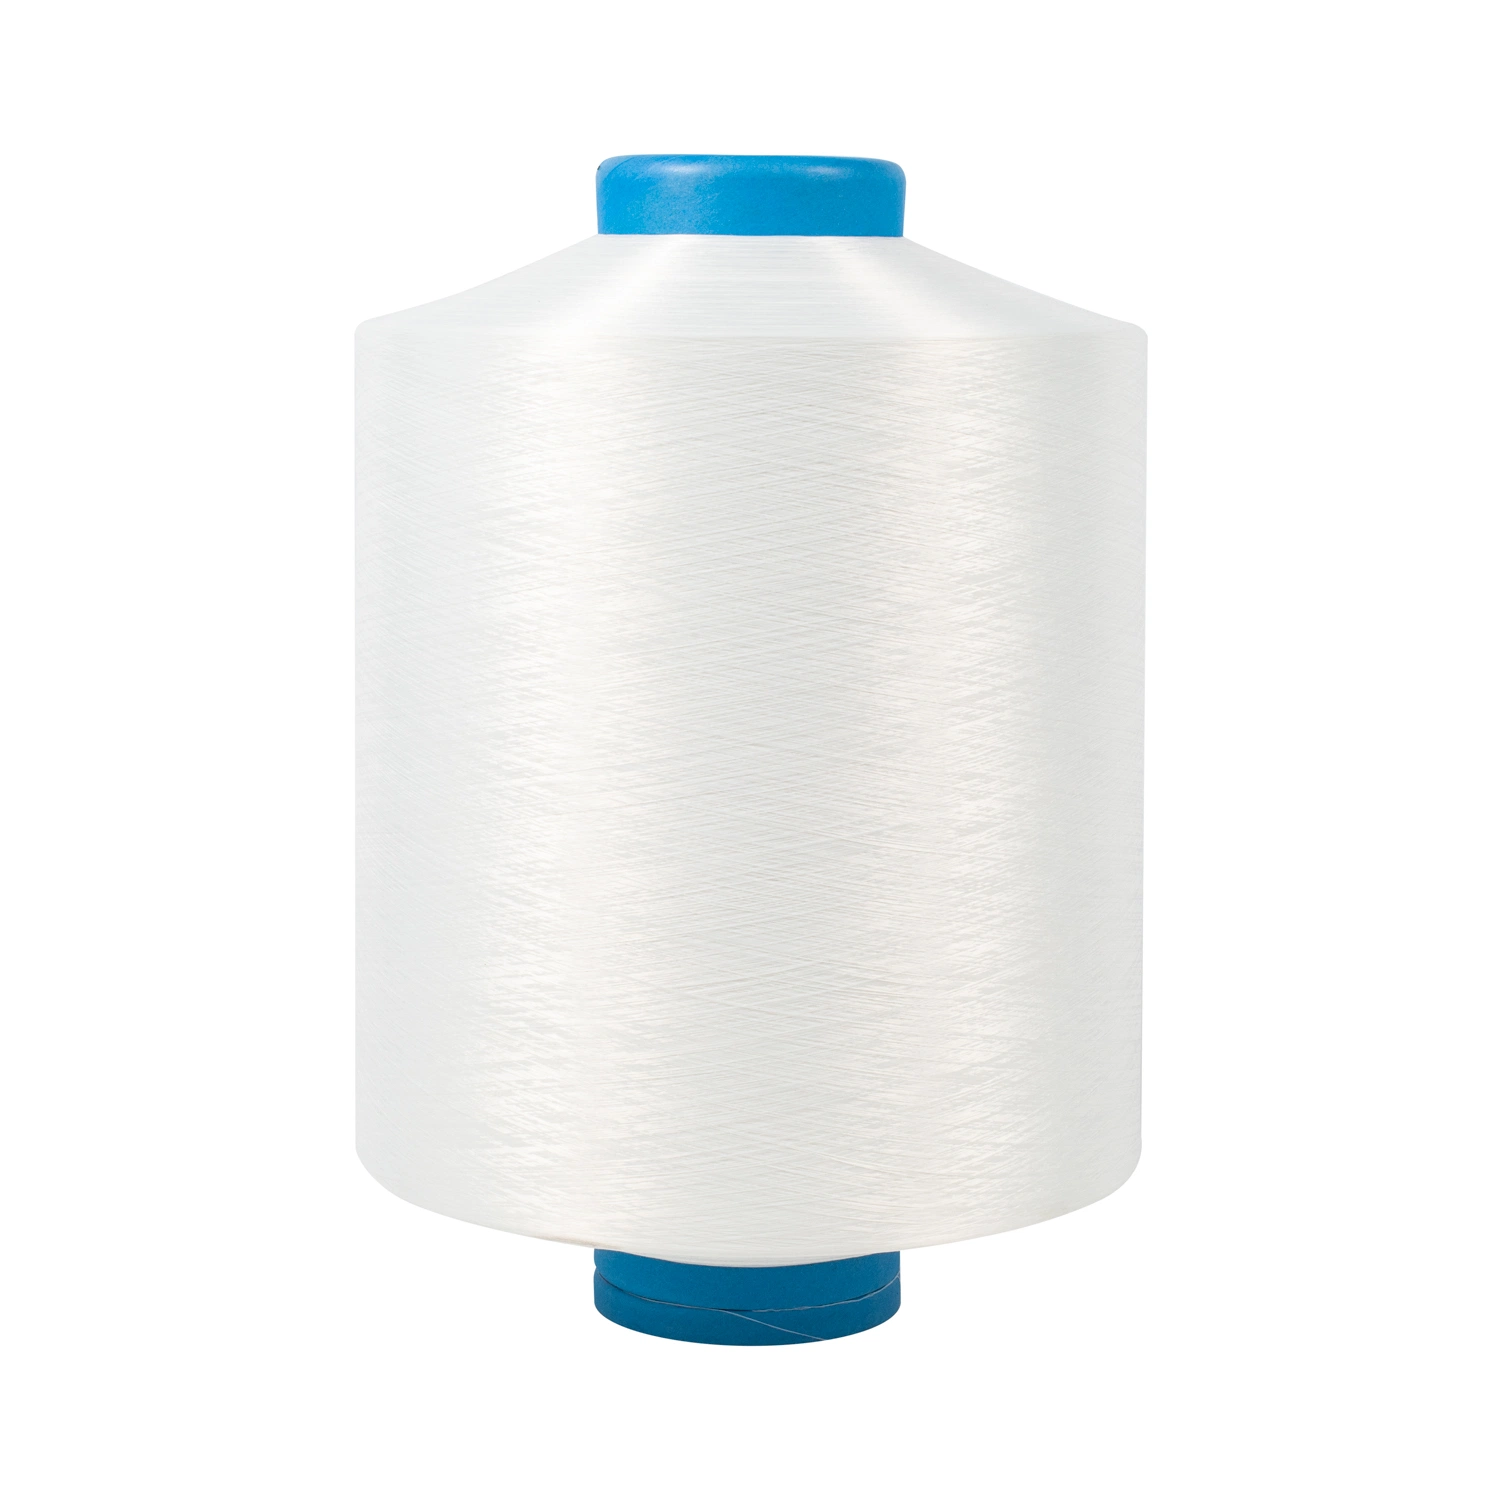 ATY FD 90D/196F Raw Material Recycled Polyester Yarn With GRS Certificate